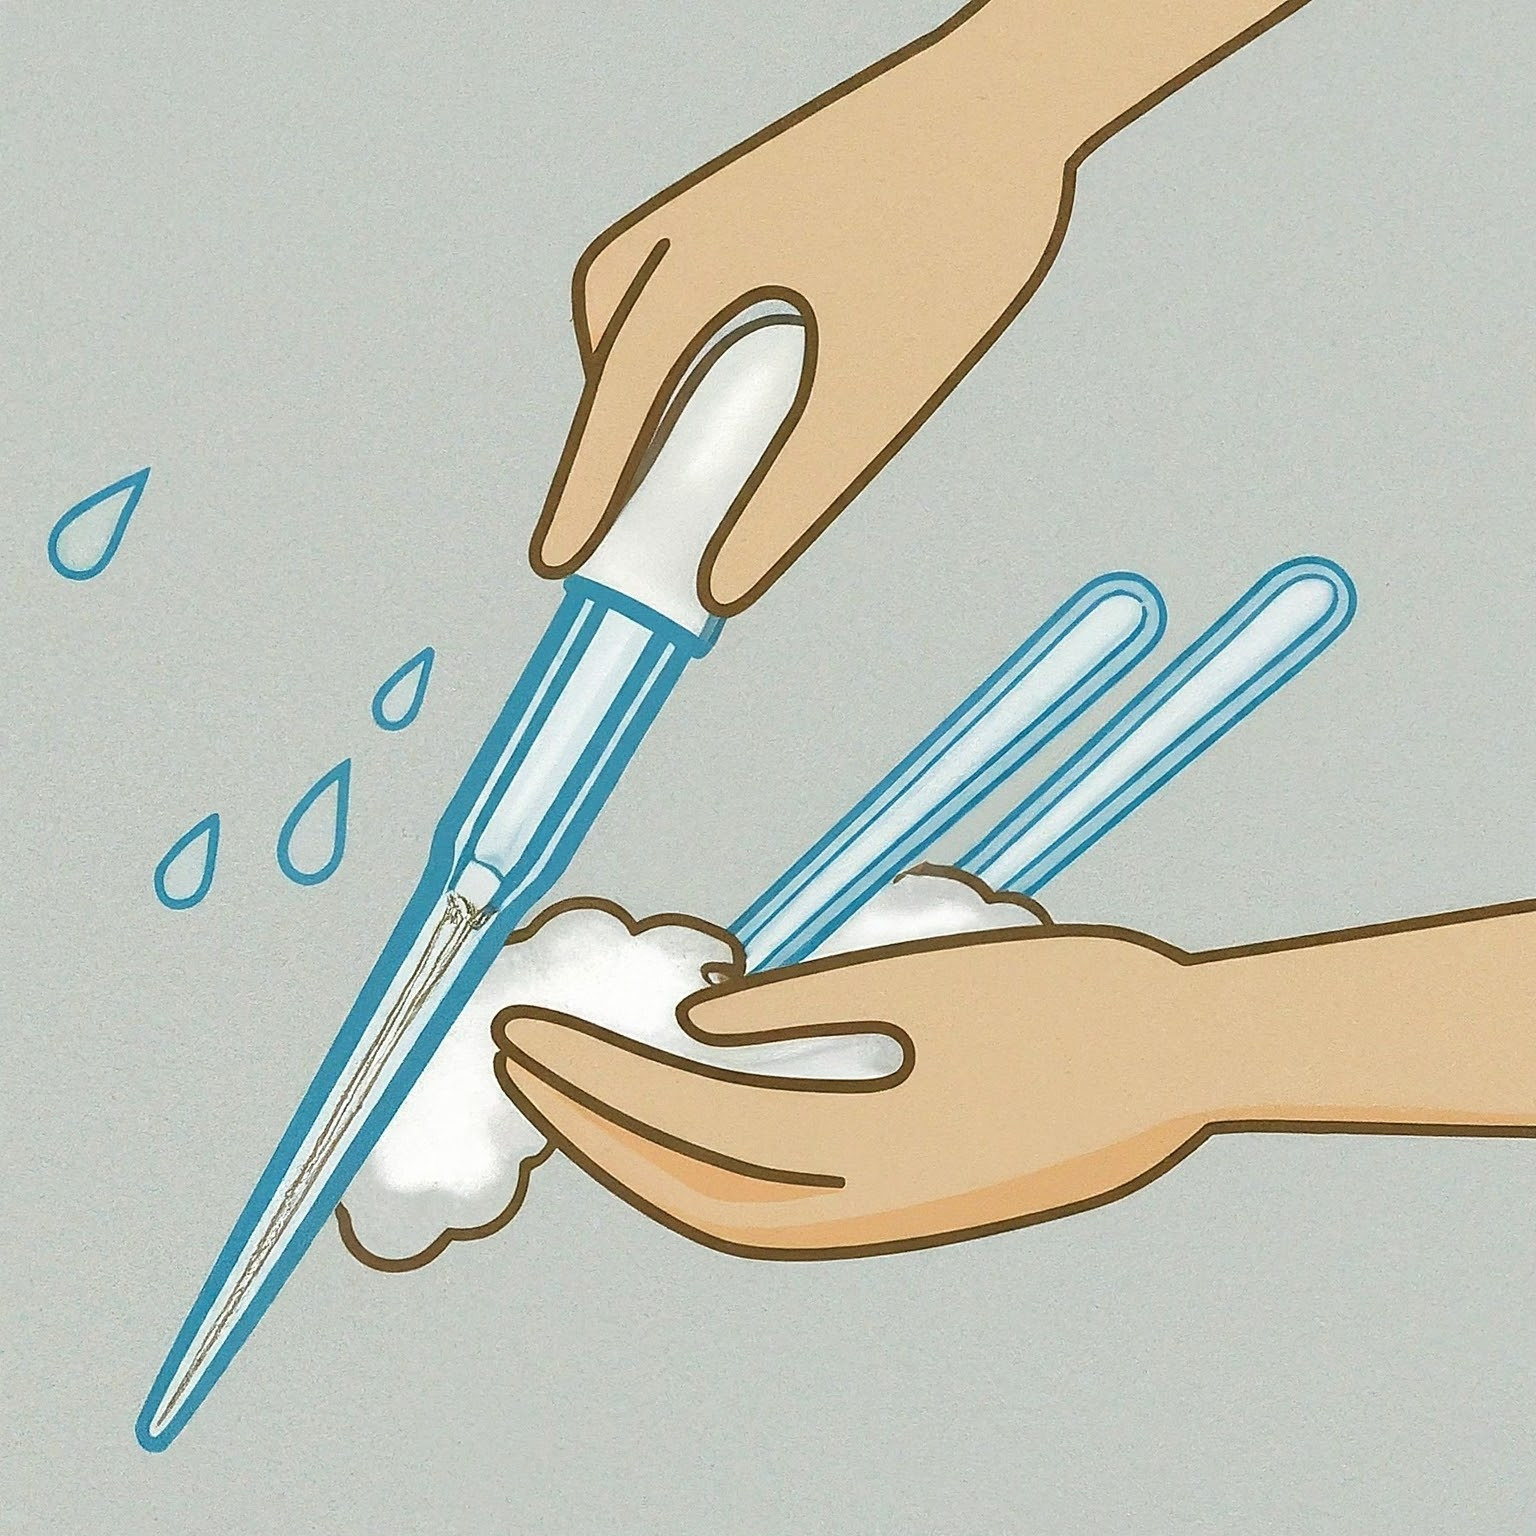 Illustration of cleaning and sterilizing Mohr pipets